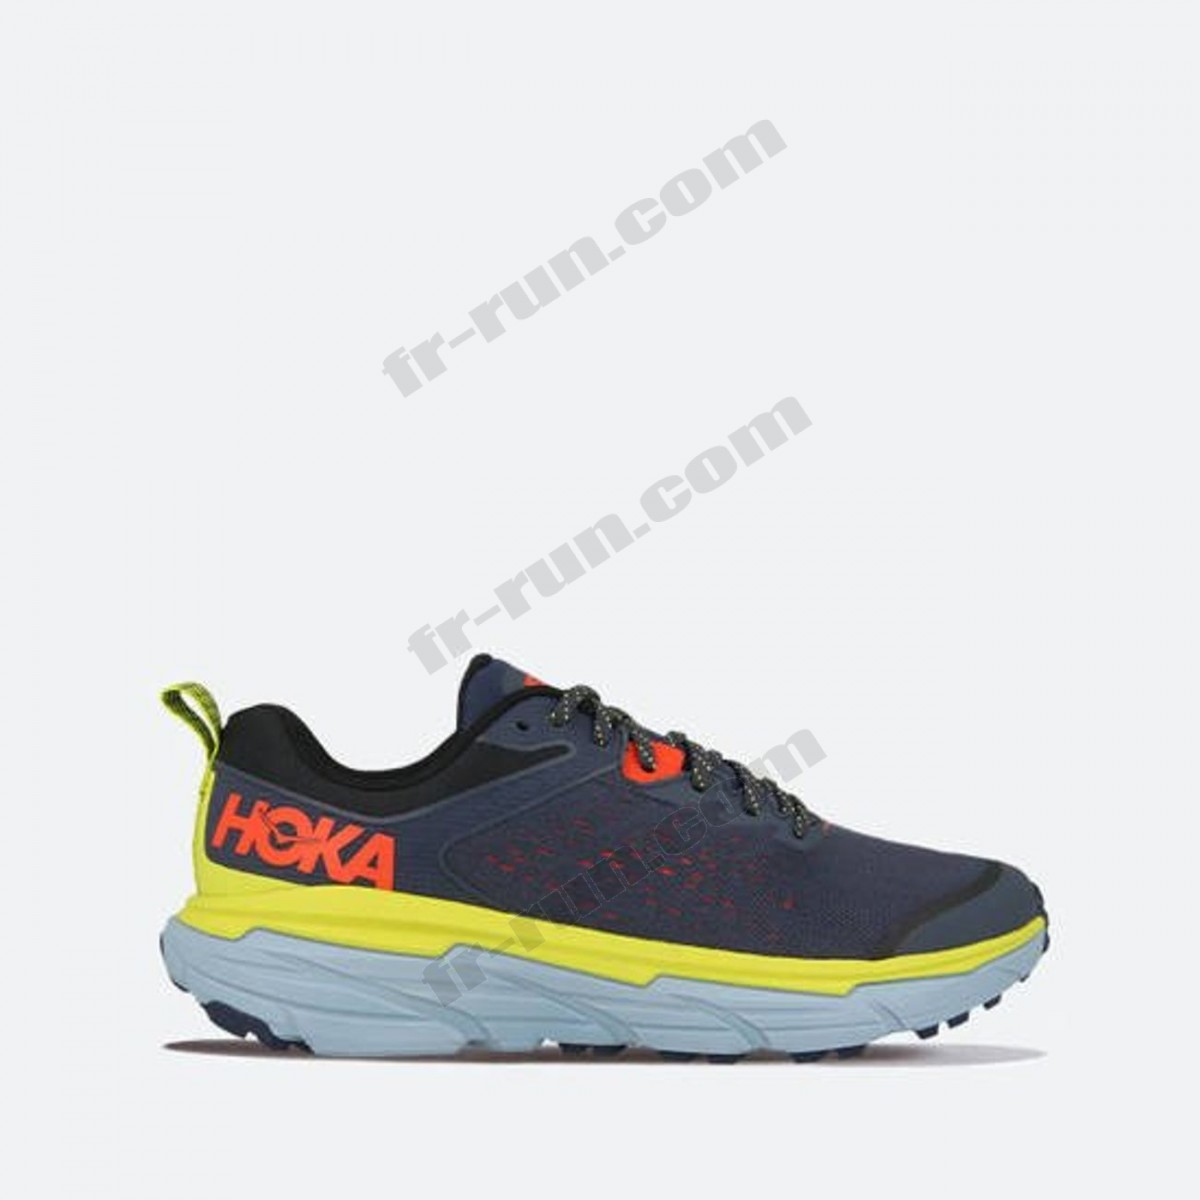 Hoka One One/CHAUSSURES running homme HOKA ONE ONE CHALLENGER ATR 6 √ Nouveau style √ Soldes - -0